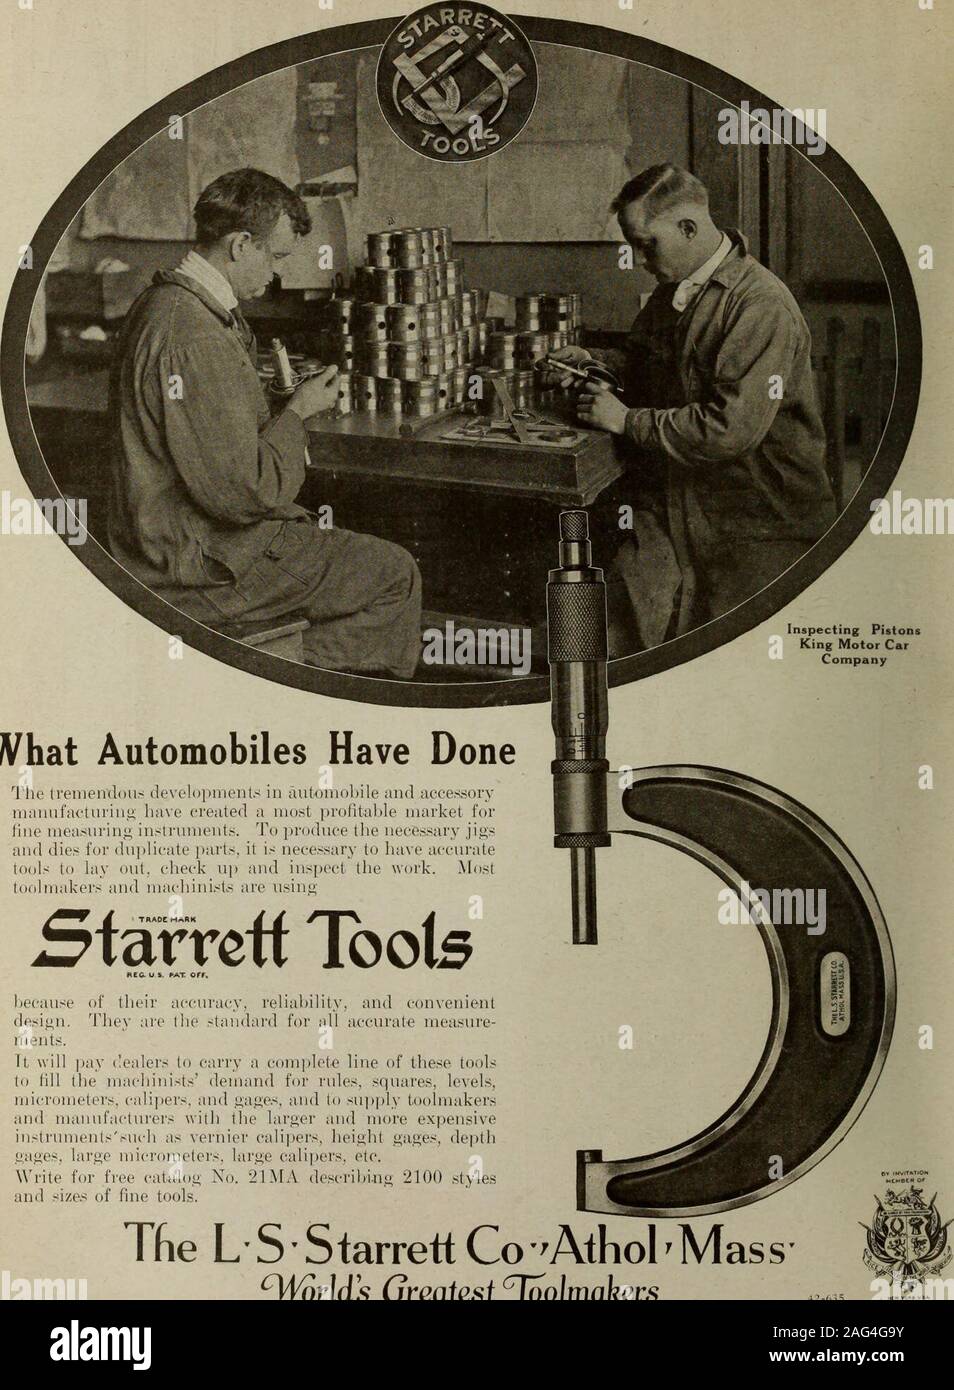 . Hardware merchandising March-June 1917. A. C. PENN, Incorporated K«l Lafayette Street Retail Price $1.50 HARDWARE AND METAL. Inspecting Pistons King Motor Car Company What Automobiles Have Done The tremendous developments in automobile and accessorymanufacturing have created a most profitable market forfine measuring instruments. To produce the necessary jigs and dies for duplicate parts, it is necessary to have accuratetools to lay out, check up and inspect the work. Mosttoolmakers and machinists are using J^^^T A TRADEMARK A A ^^^T* A irtarrctt Tools RtC. US. PAT Off. because of their accu Stock Photo